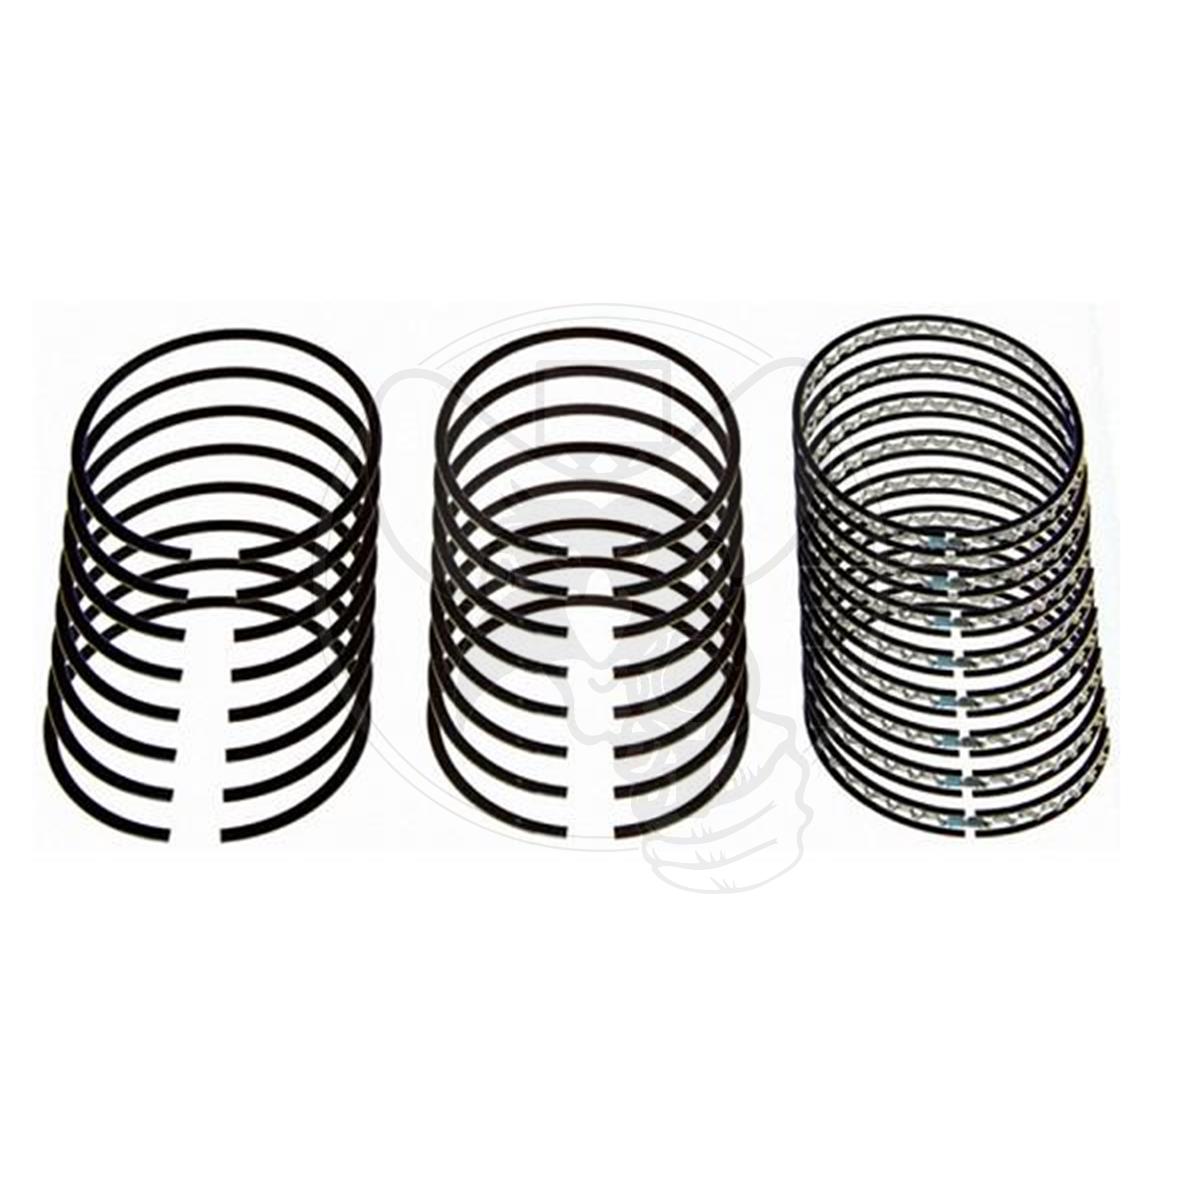 SPEED PRO 4.030" PISTON RING SET 5/64" 5/64" 3/16" THICK 8CYL CAST